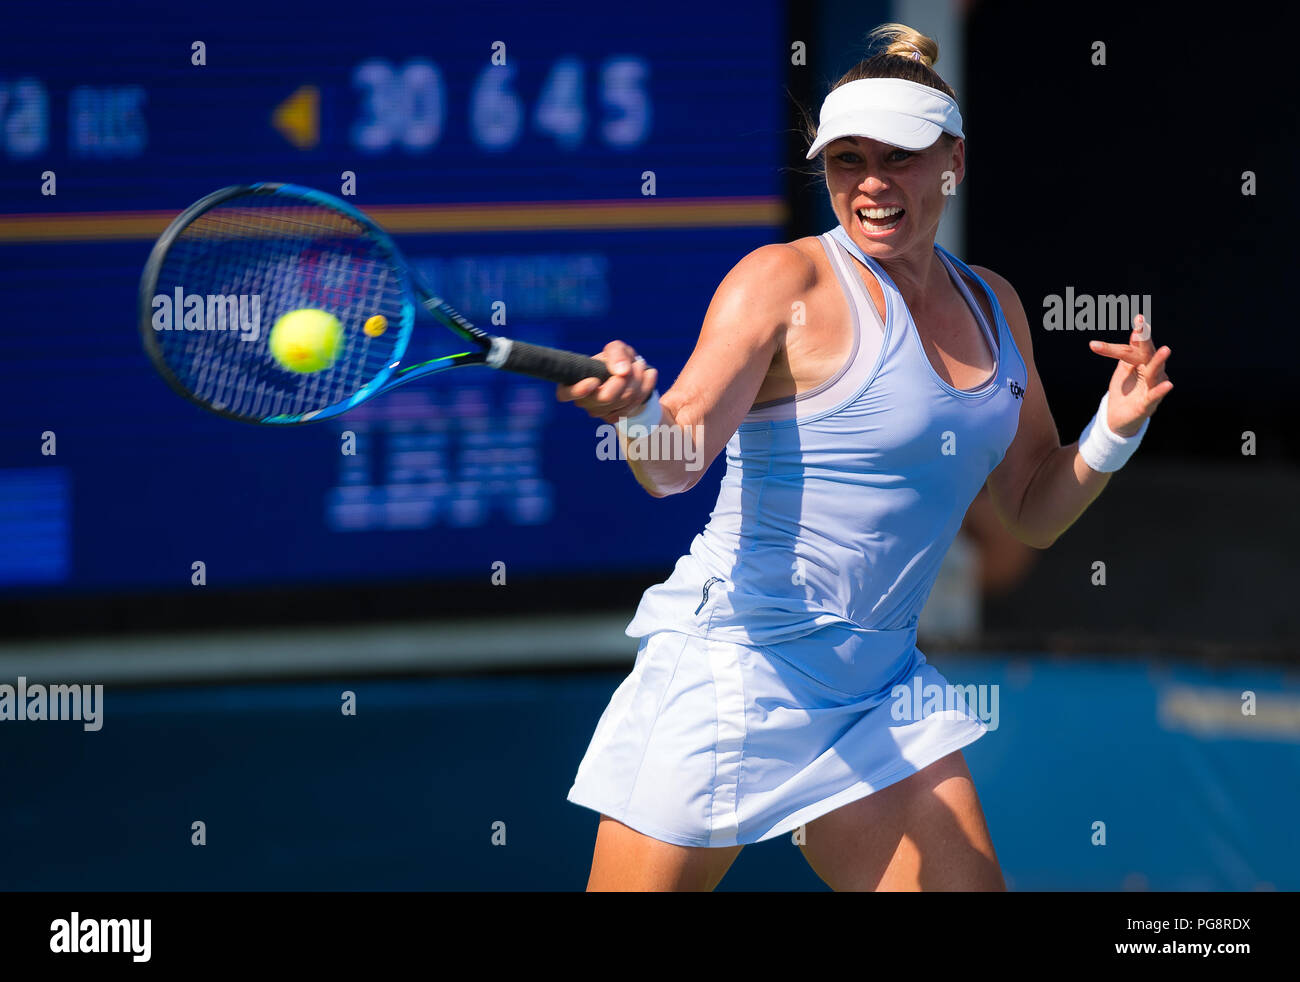 New York, USA. 24th Aug 2018. Vera Zvonareva of Russia in action during the final qualifications round at the 2018 US Open Grand Slam tennis tournament. New York, USA. August 24th 2018. 24th Aug, 2018. Credit: AFP7/ZUMA Wire/Alamy Live News Stock Photo